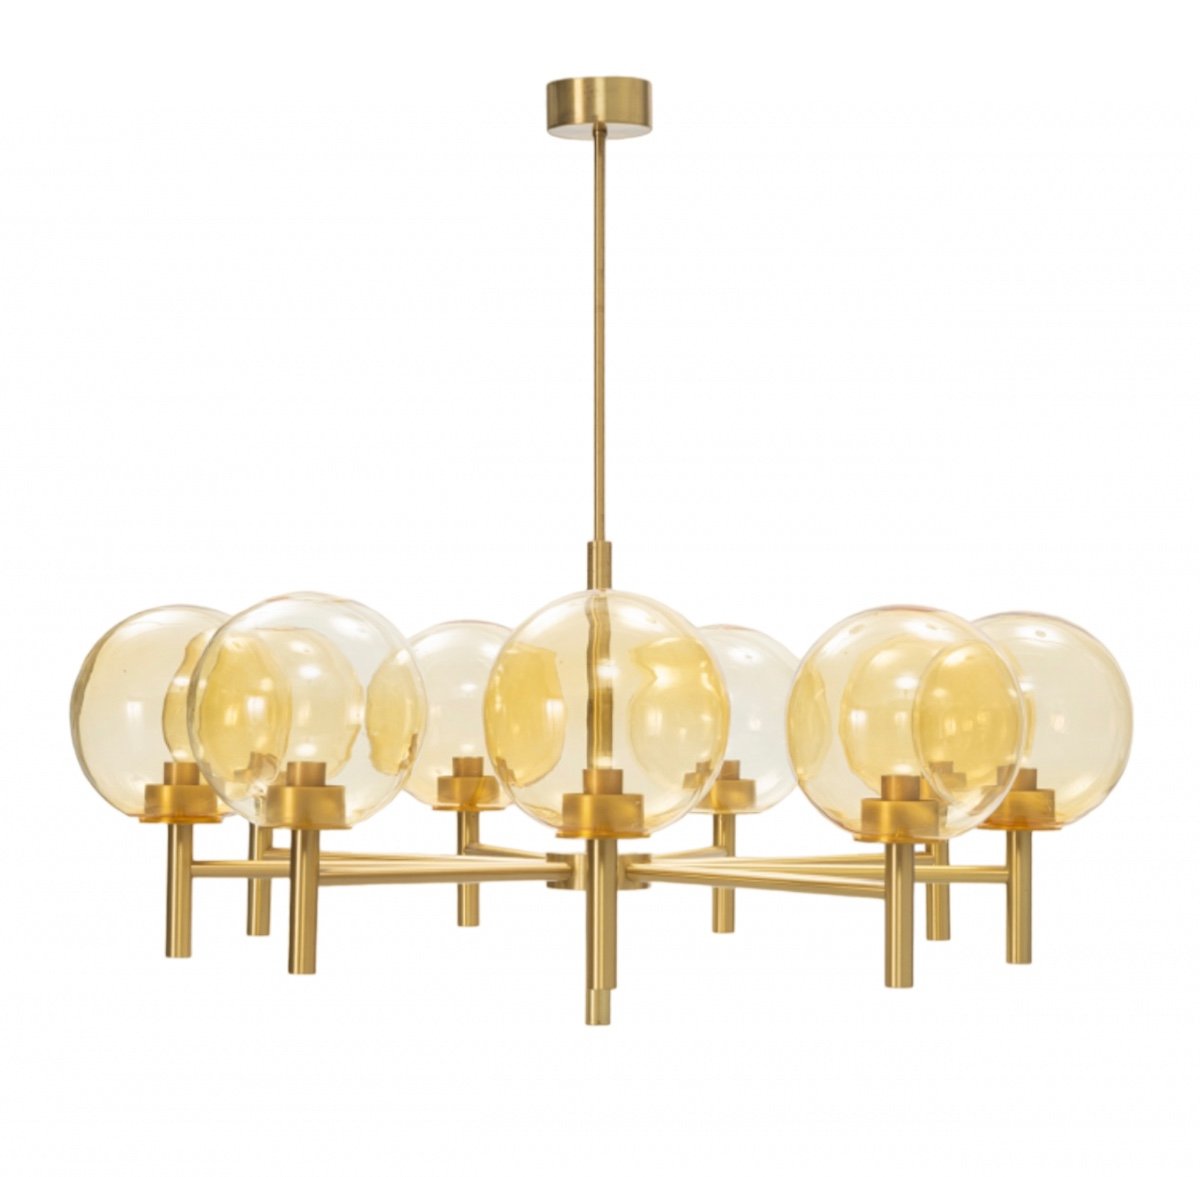 Large Luxus Chandelier With 9 Lights In Golden Brass And Amber Glass Globes, Sweden 1970s/80s-photo-2